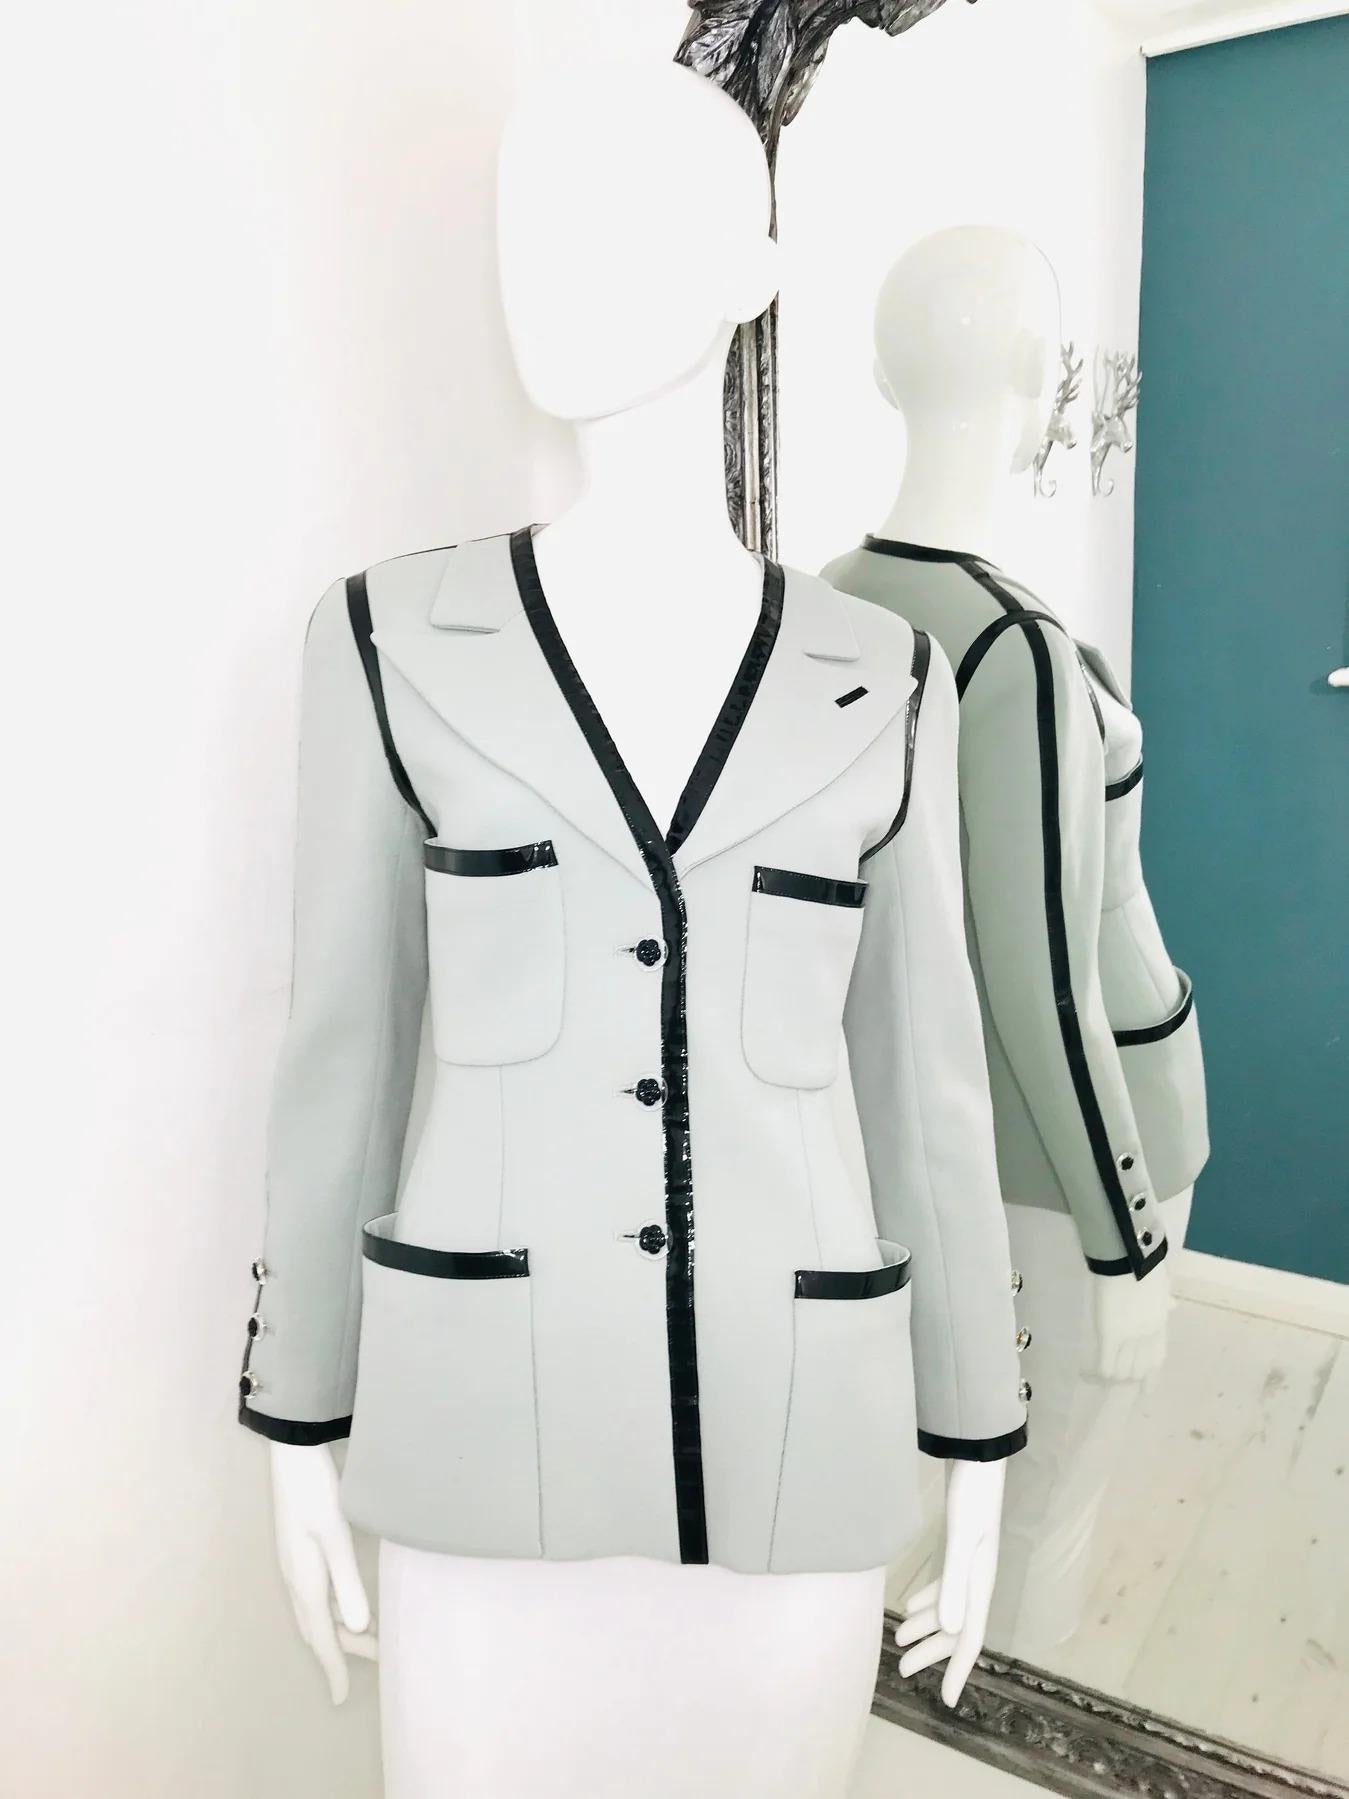 Vintage Chanel Boutique Pale Blue Jacket with Black Patent Leather Trim

Long sleeves. Four front pockets.Plastic buttons with Camellia at the front and three on the each sleeve. Blue lining with CC logo printed Gold chain at the bottom on the